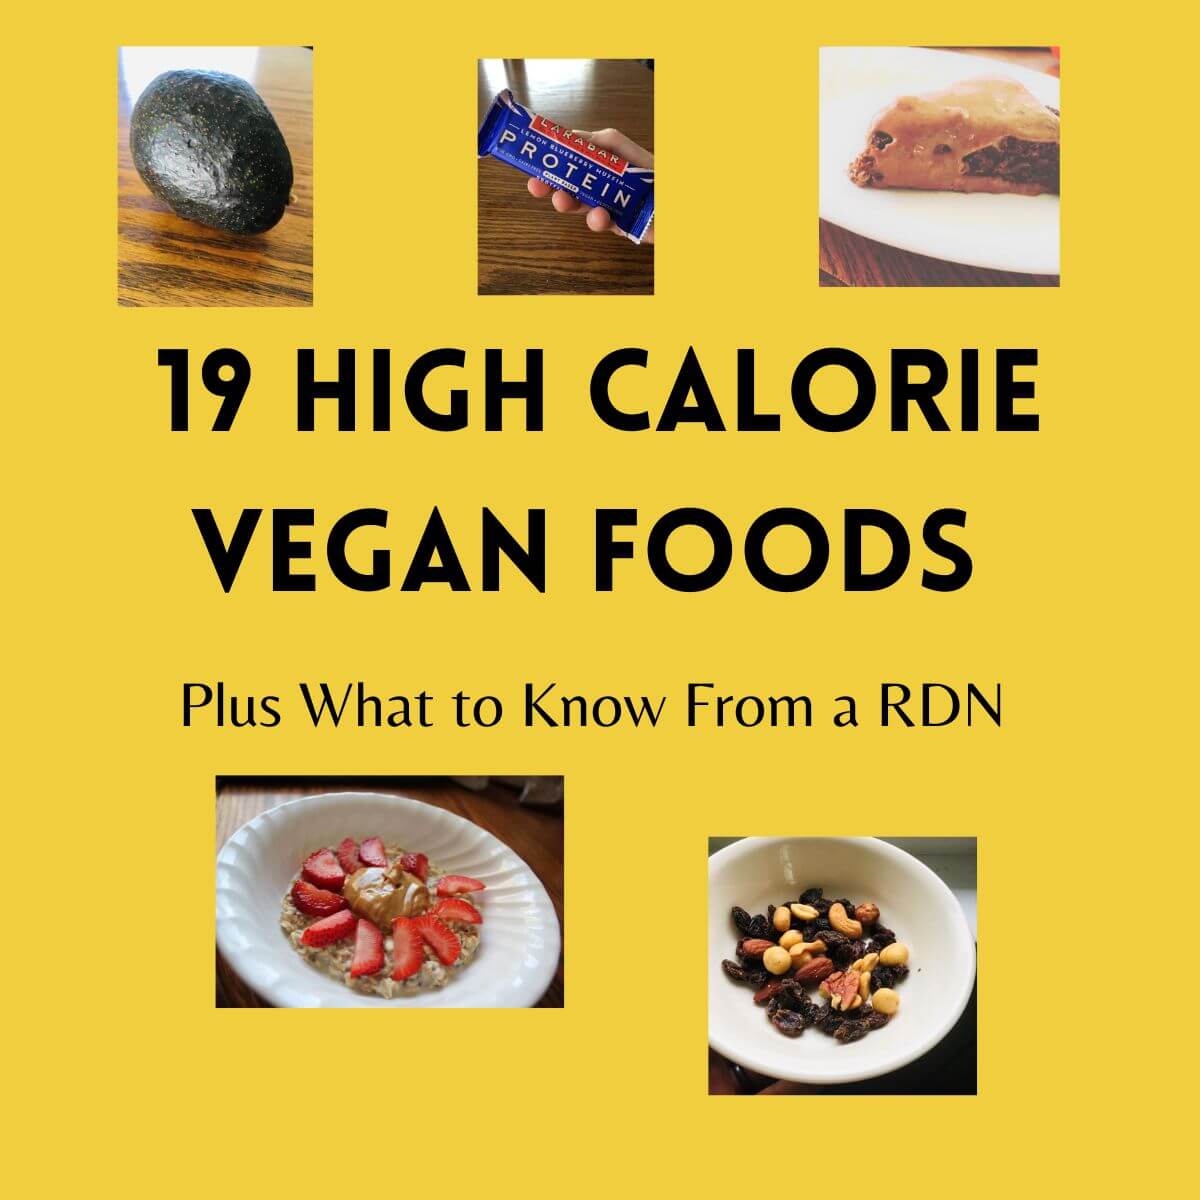 featured image for post: 19 high calorie vegan foods plus what to know from a RDN. Pictures include a avocado, a vegan protein bar, a vegan chocolate cake, nuts and dried fruit, and oatmeal topped with peanut butter and strawberries.